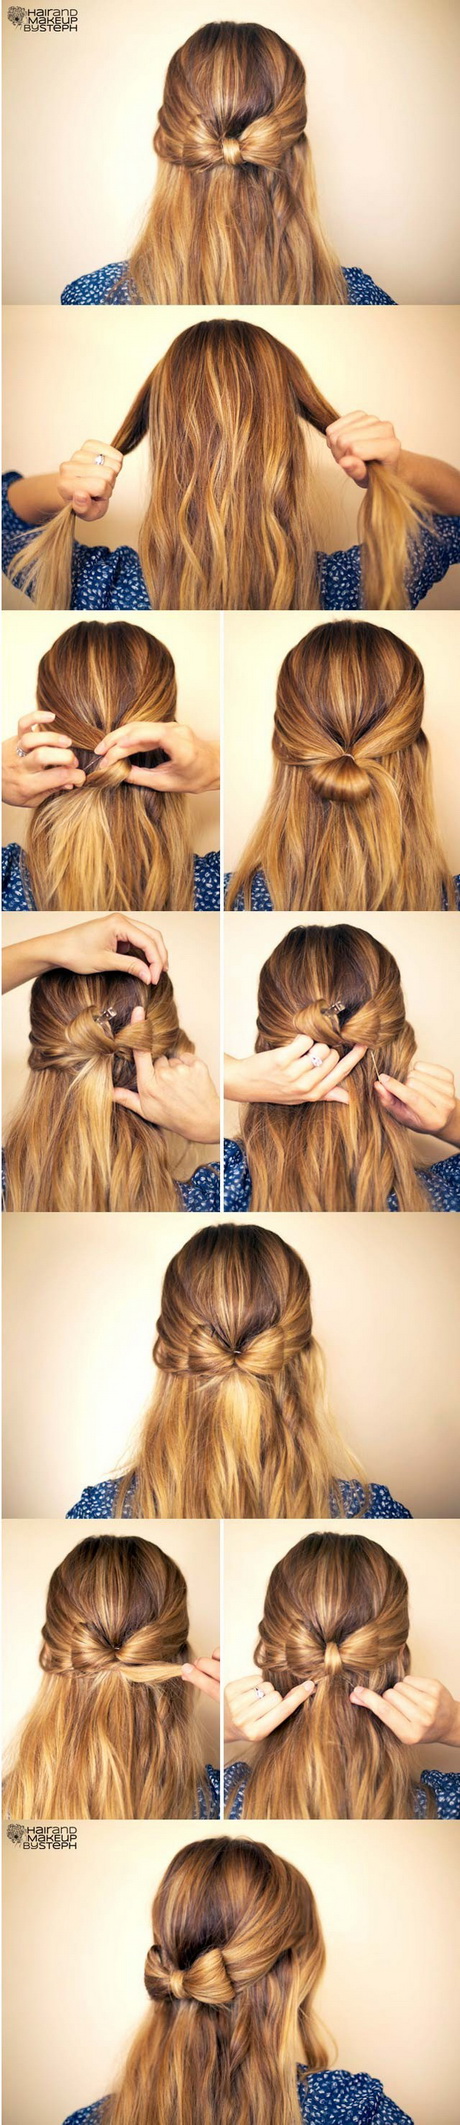 Easy hairstyles for girls with long hair easy-hairstyles-for-girls-with-long-hair-12-8